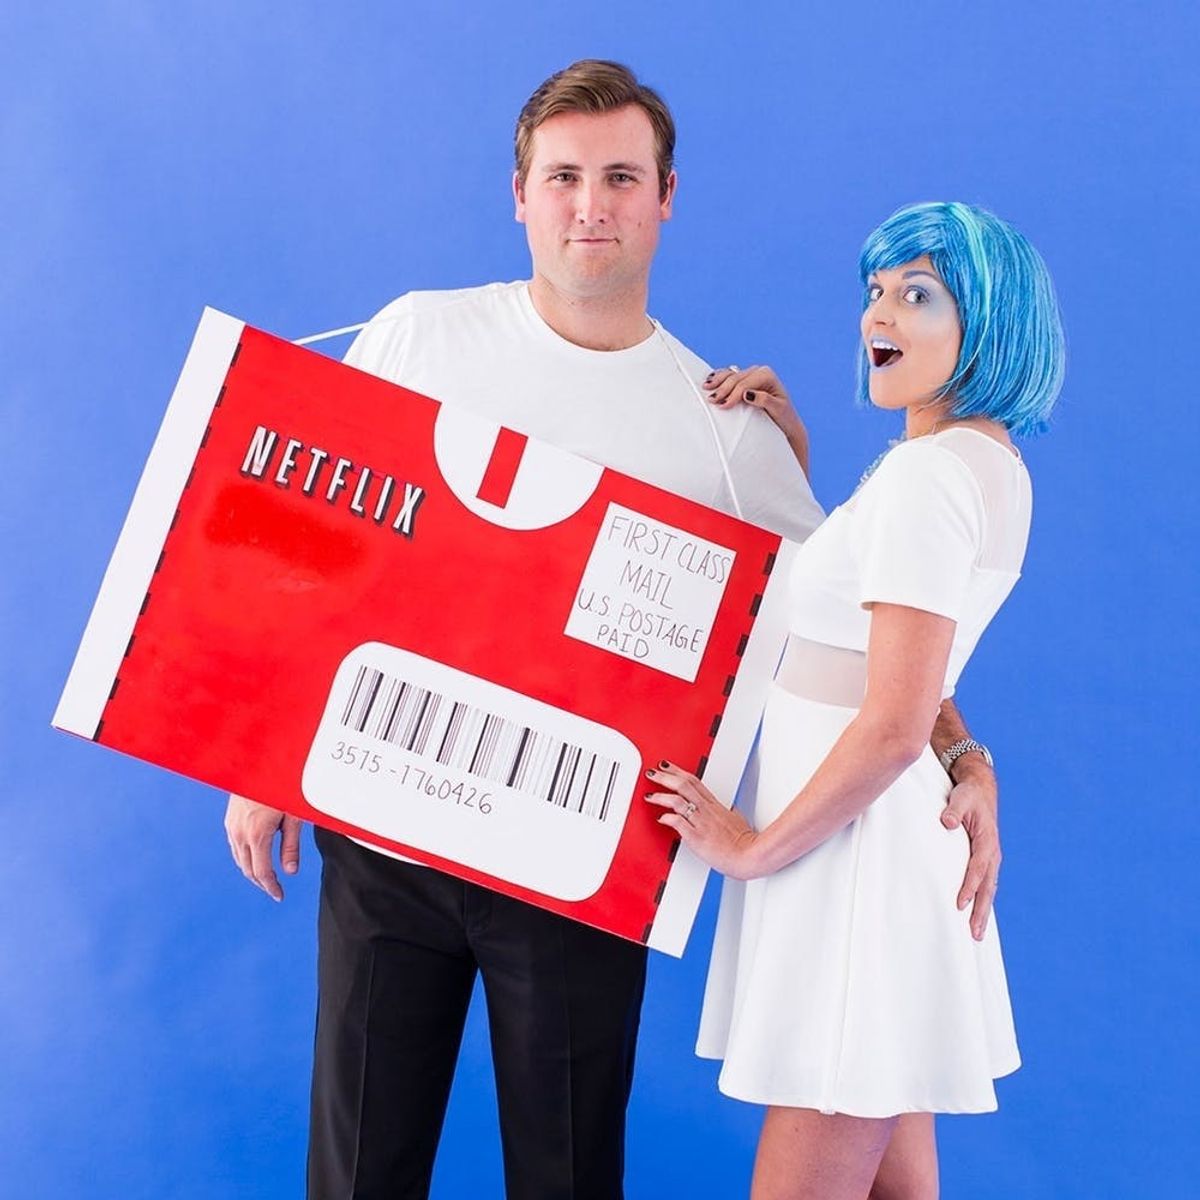 30 Ridiculously Punny Halloween Costume Ideas